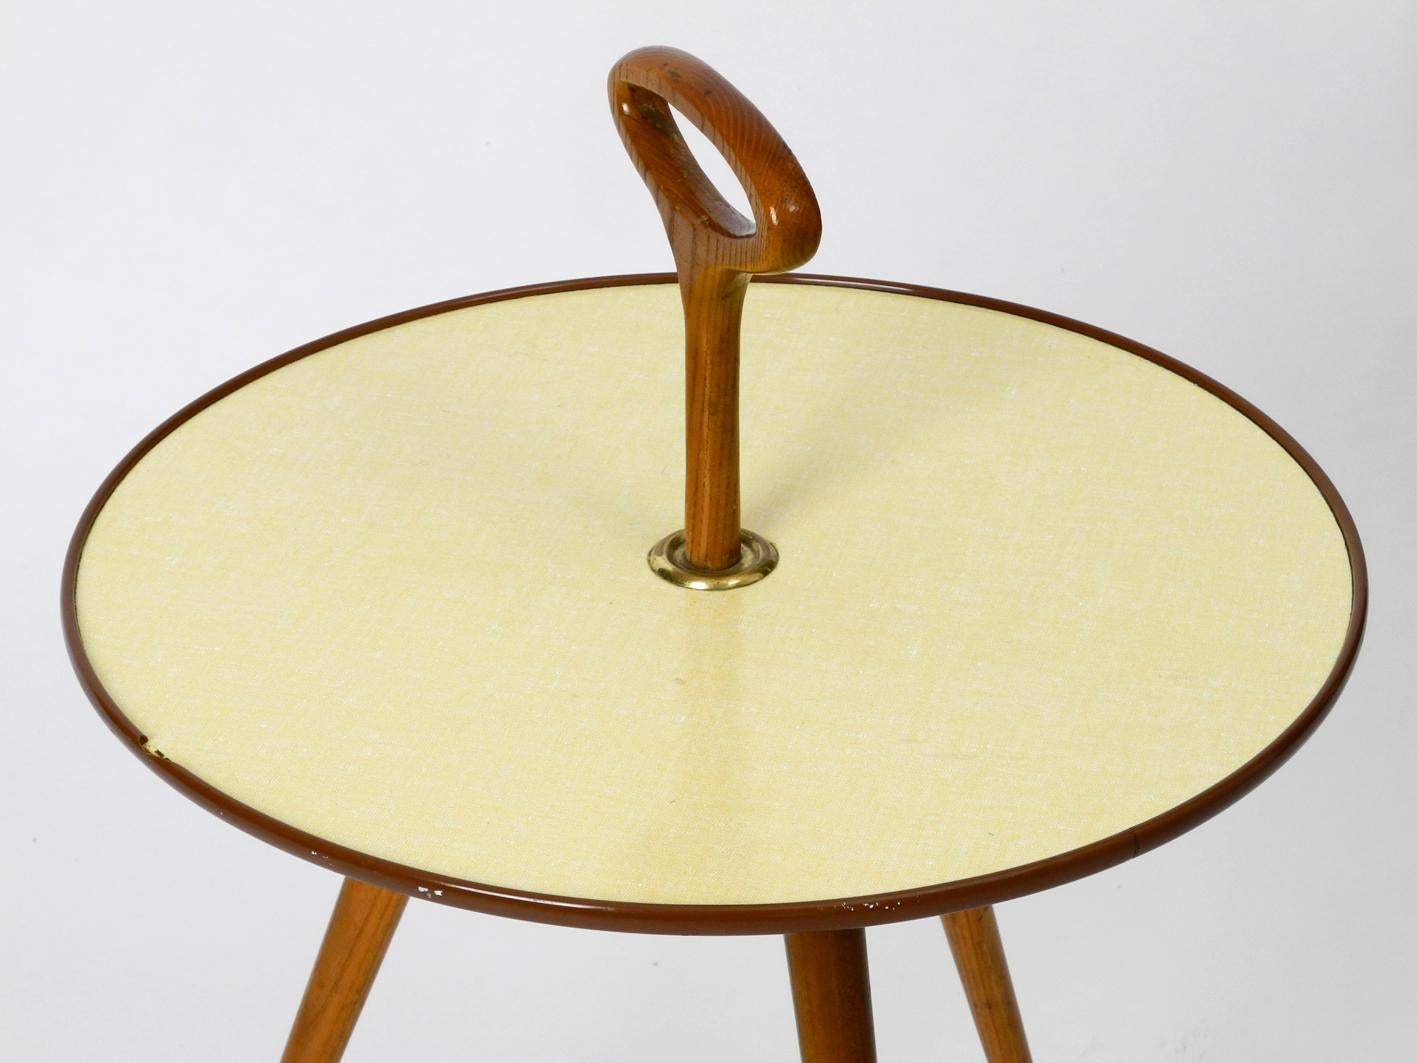 European Rare Round Mid-Century Modern Tripod Table with Walnut Handle and Legs